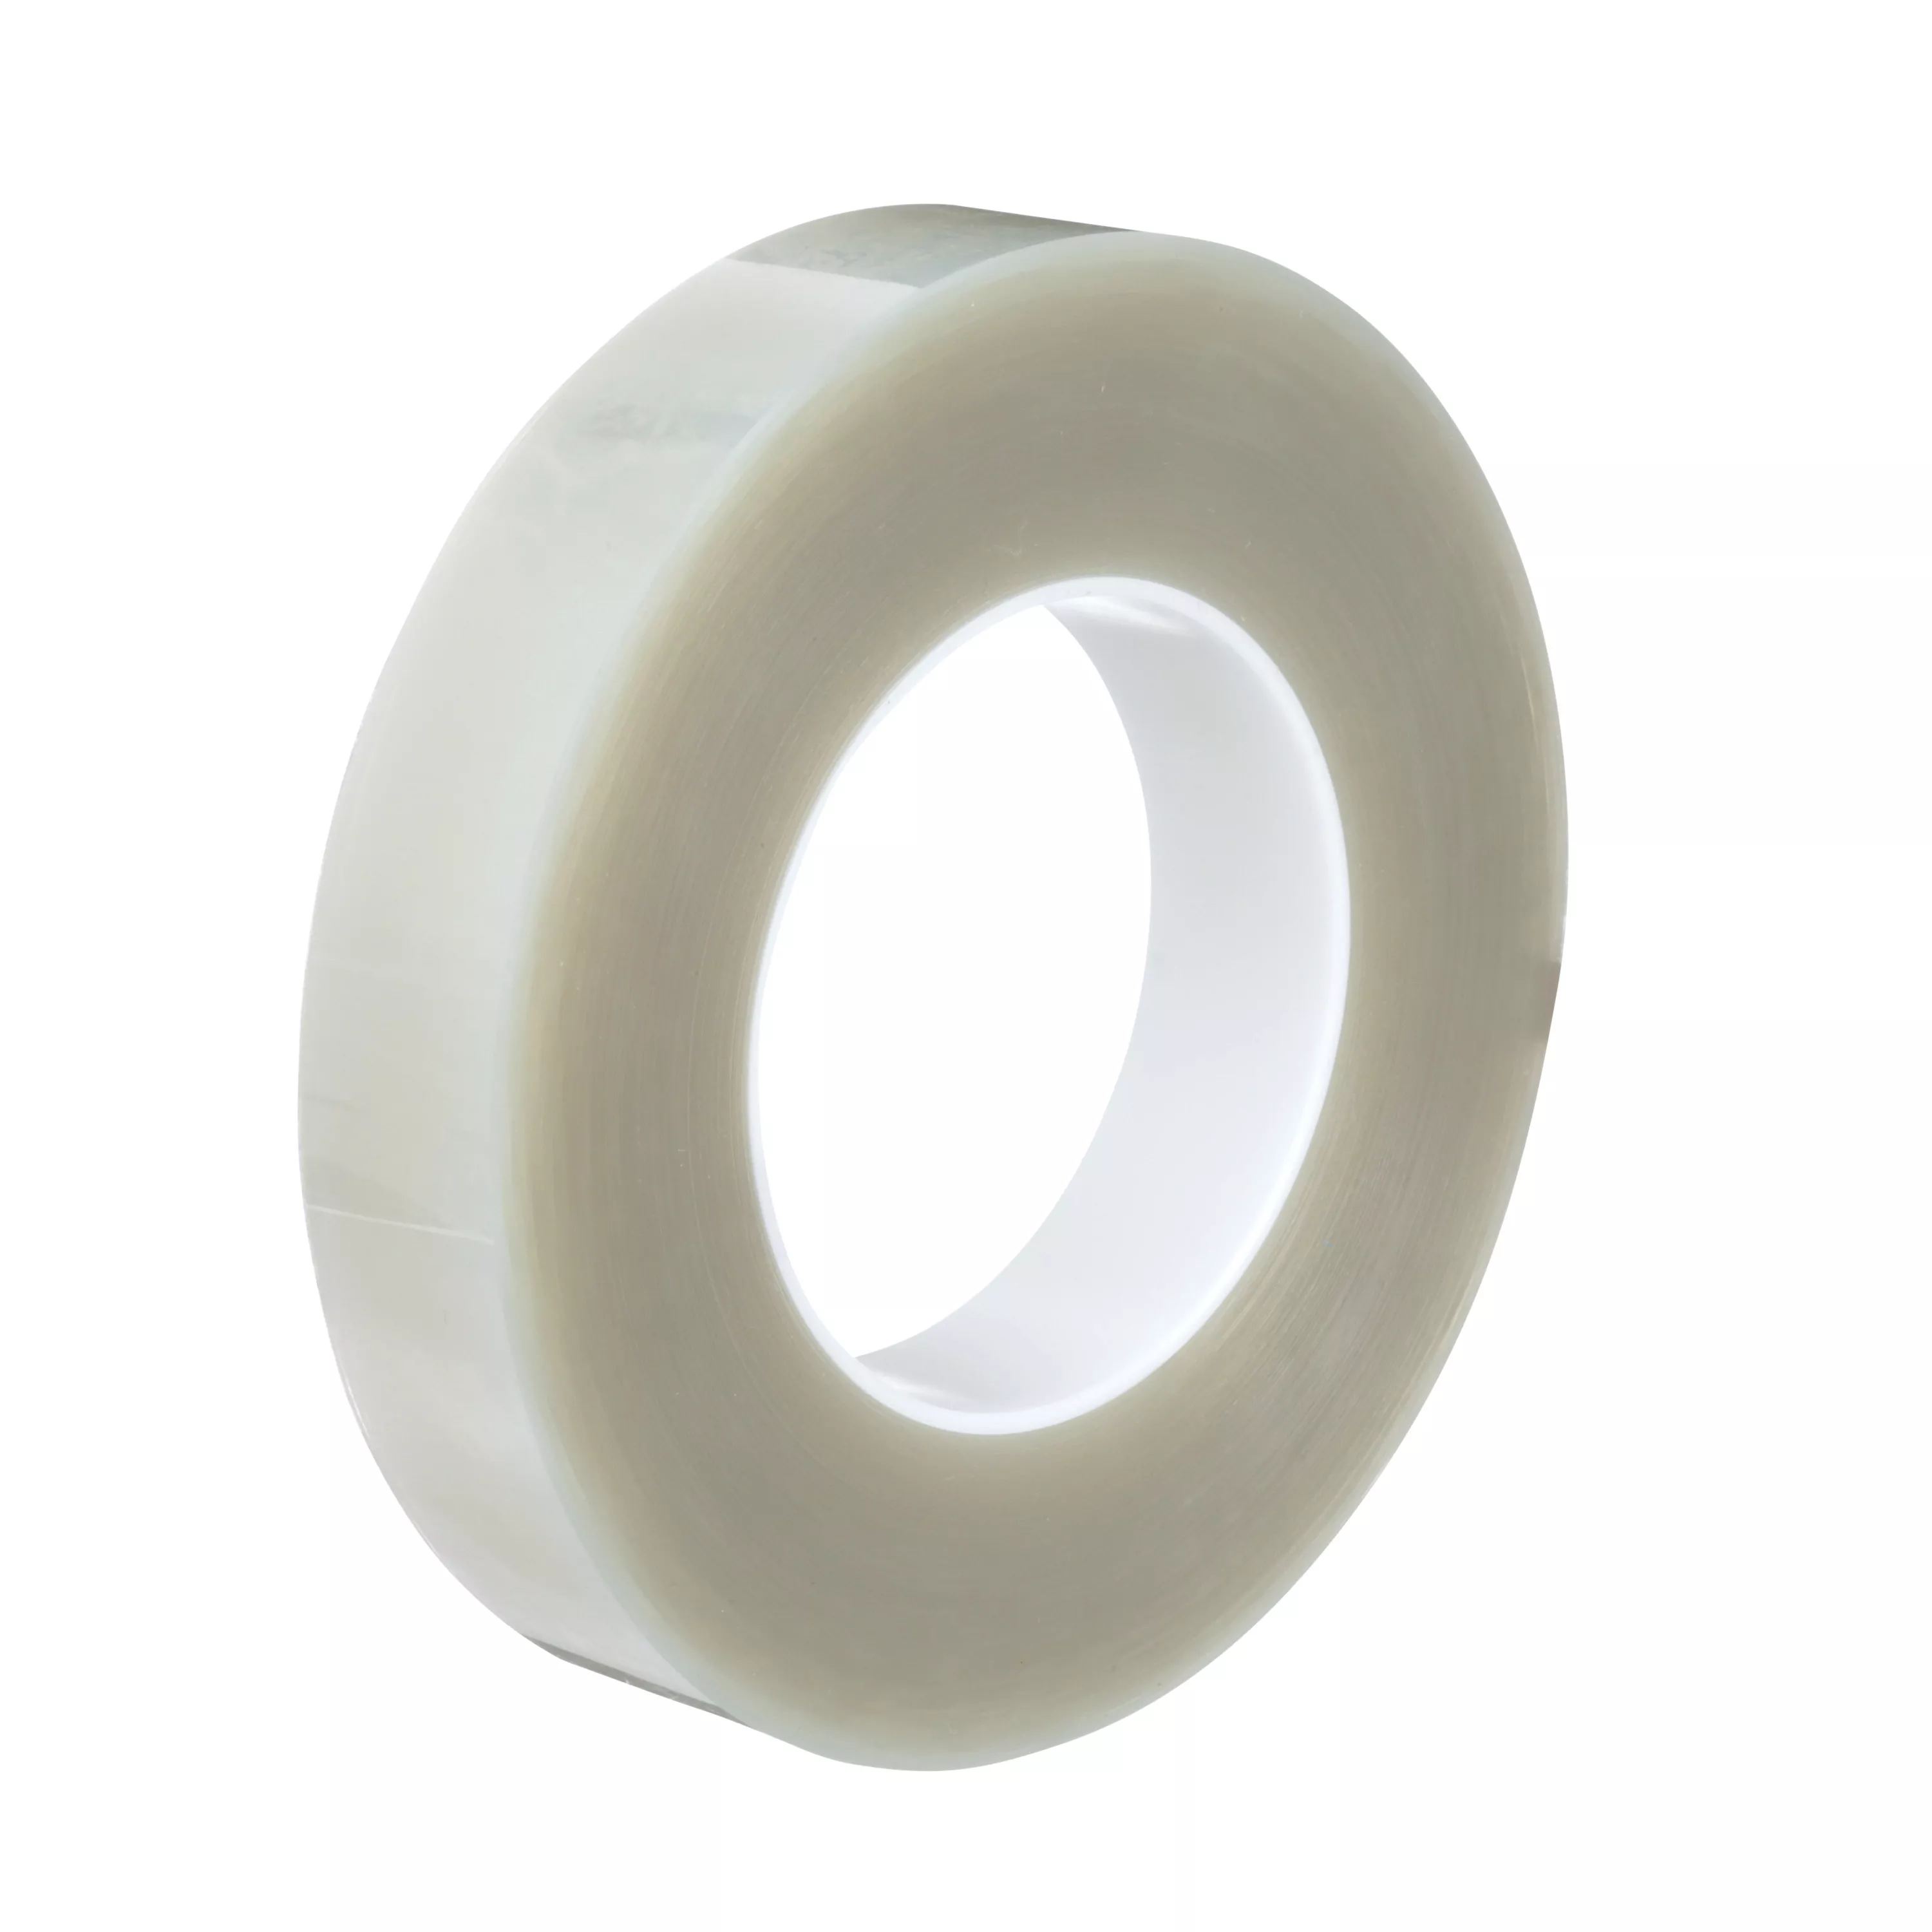 3M™ Polyester Tape 8412, Transparent, 1 in x 72 yd, 6.3 mil, 36
Roll/Case